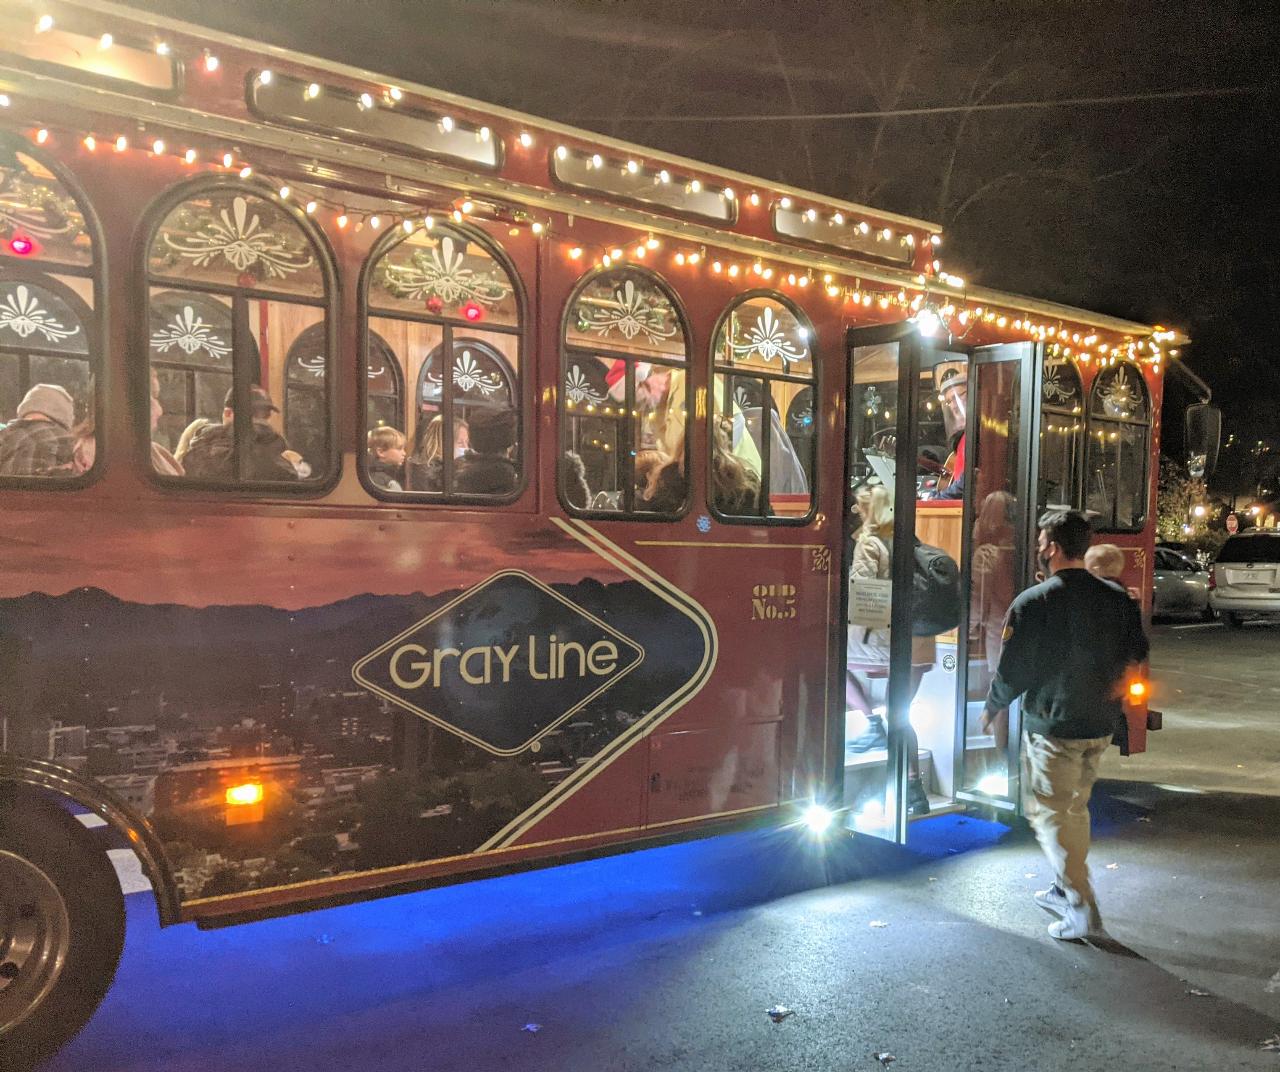 Holly Jolly Christmas Trolley Tour